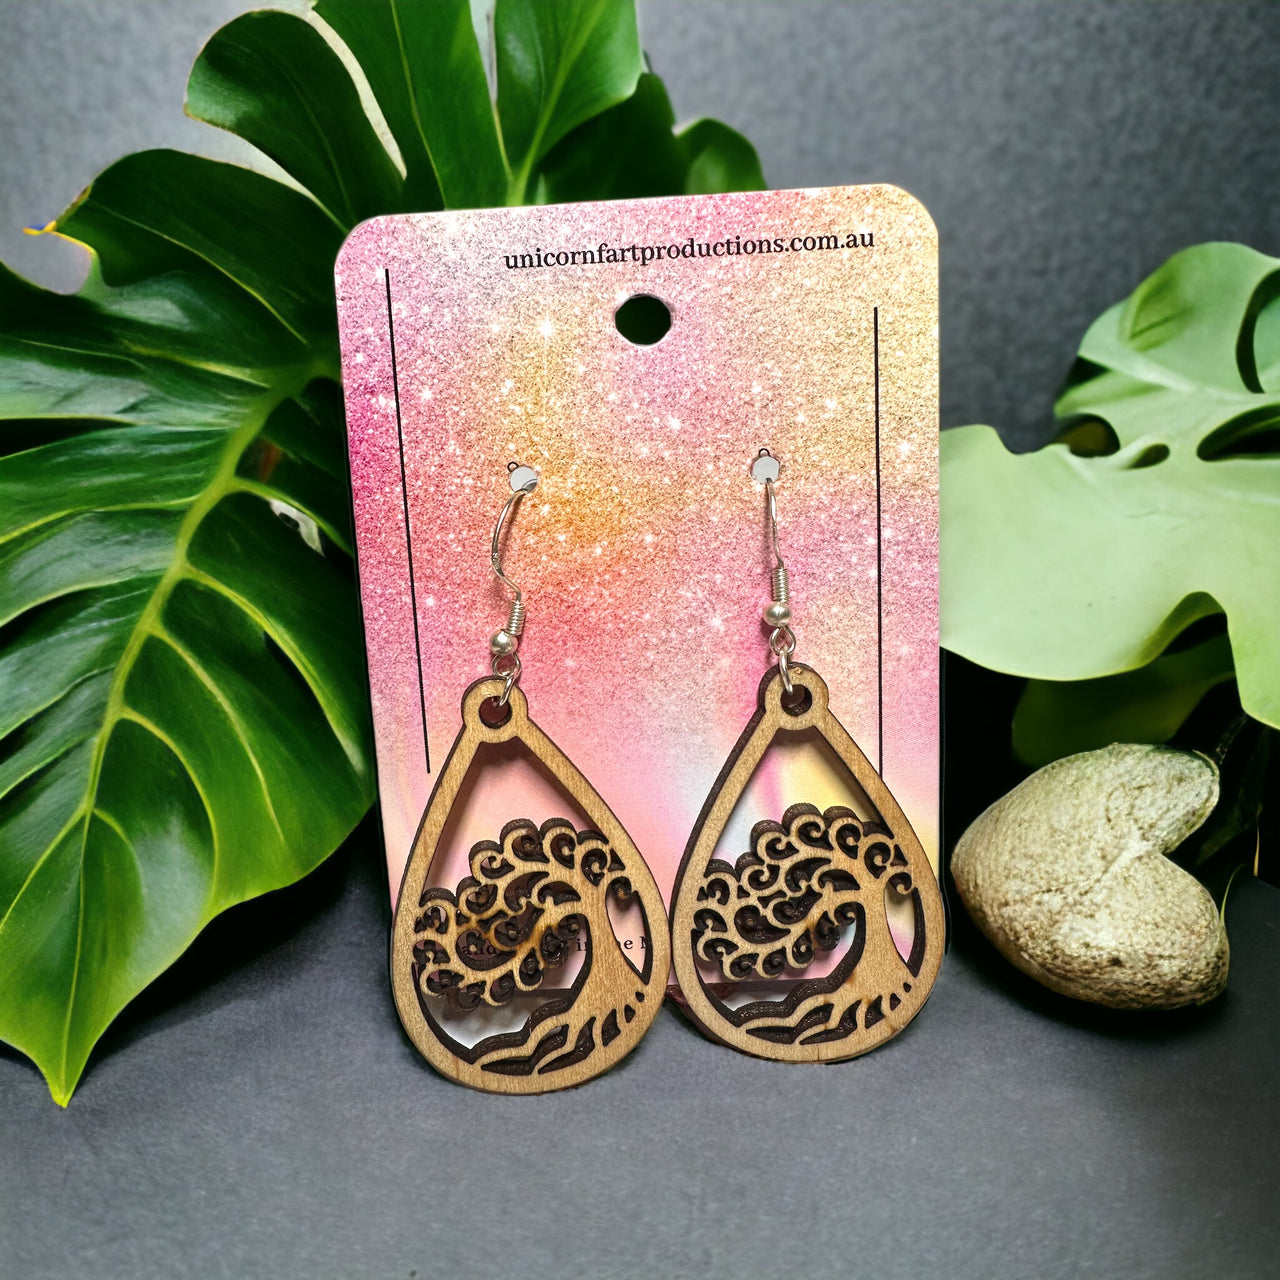 Wooden Handmade earrings crafted from sustainable timber - Trees 5